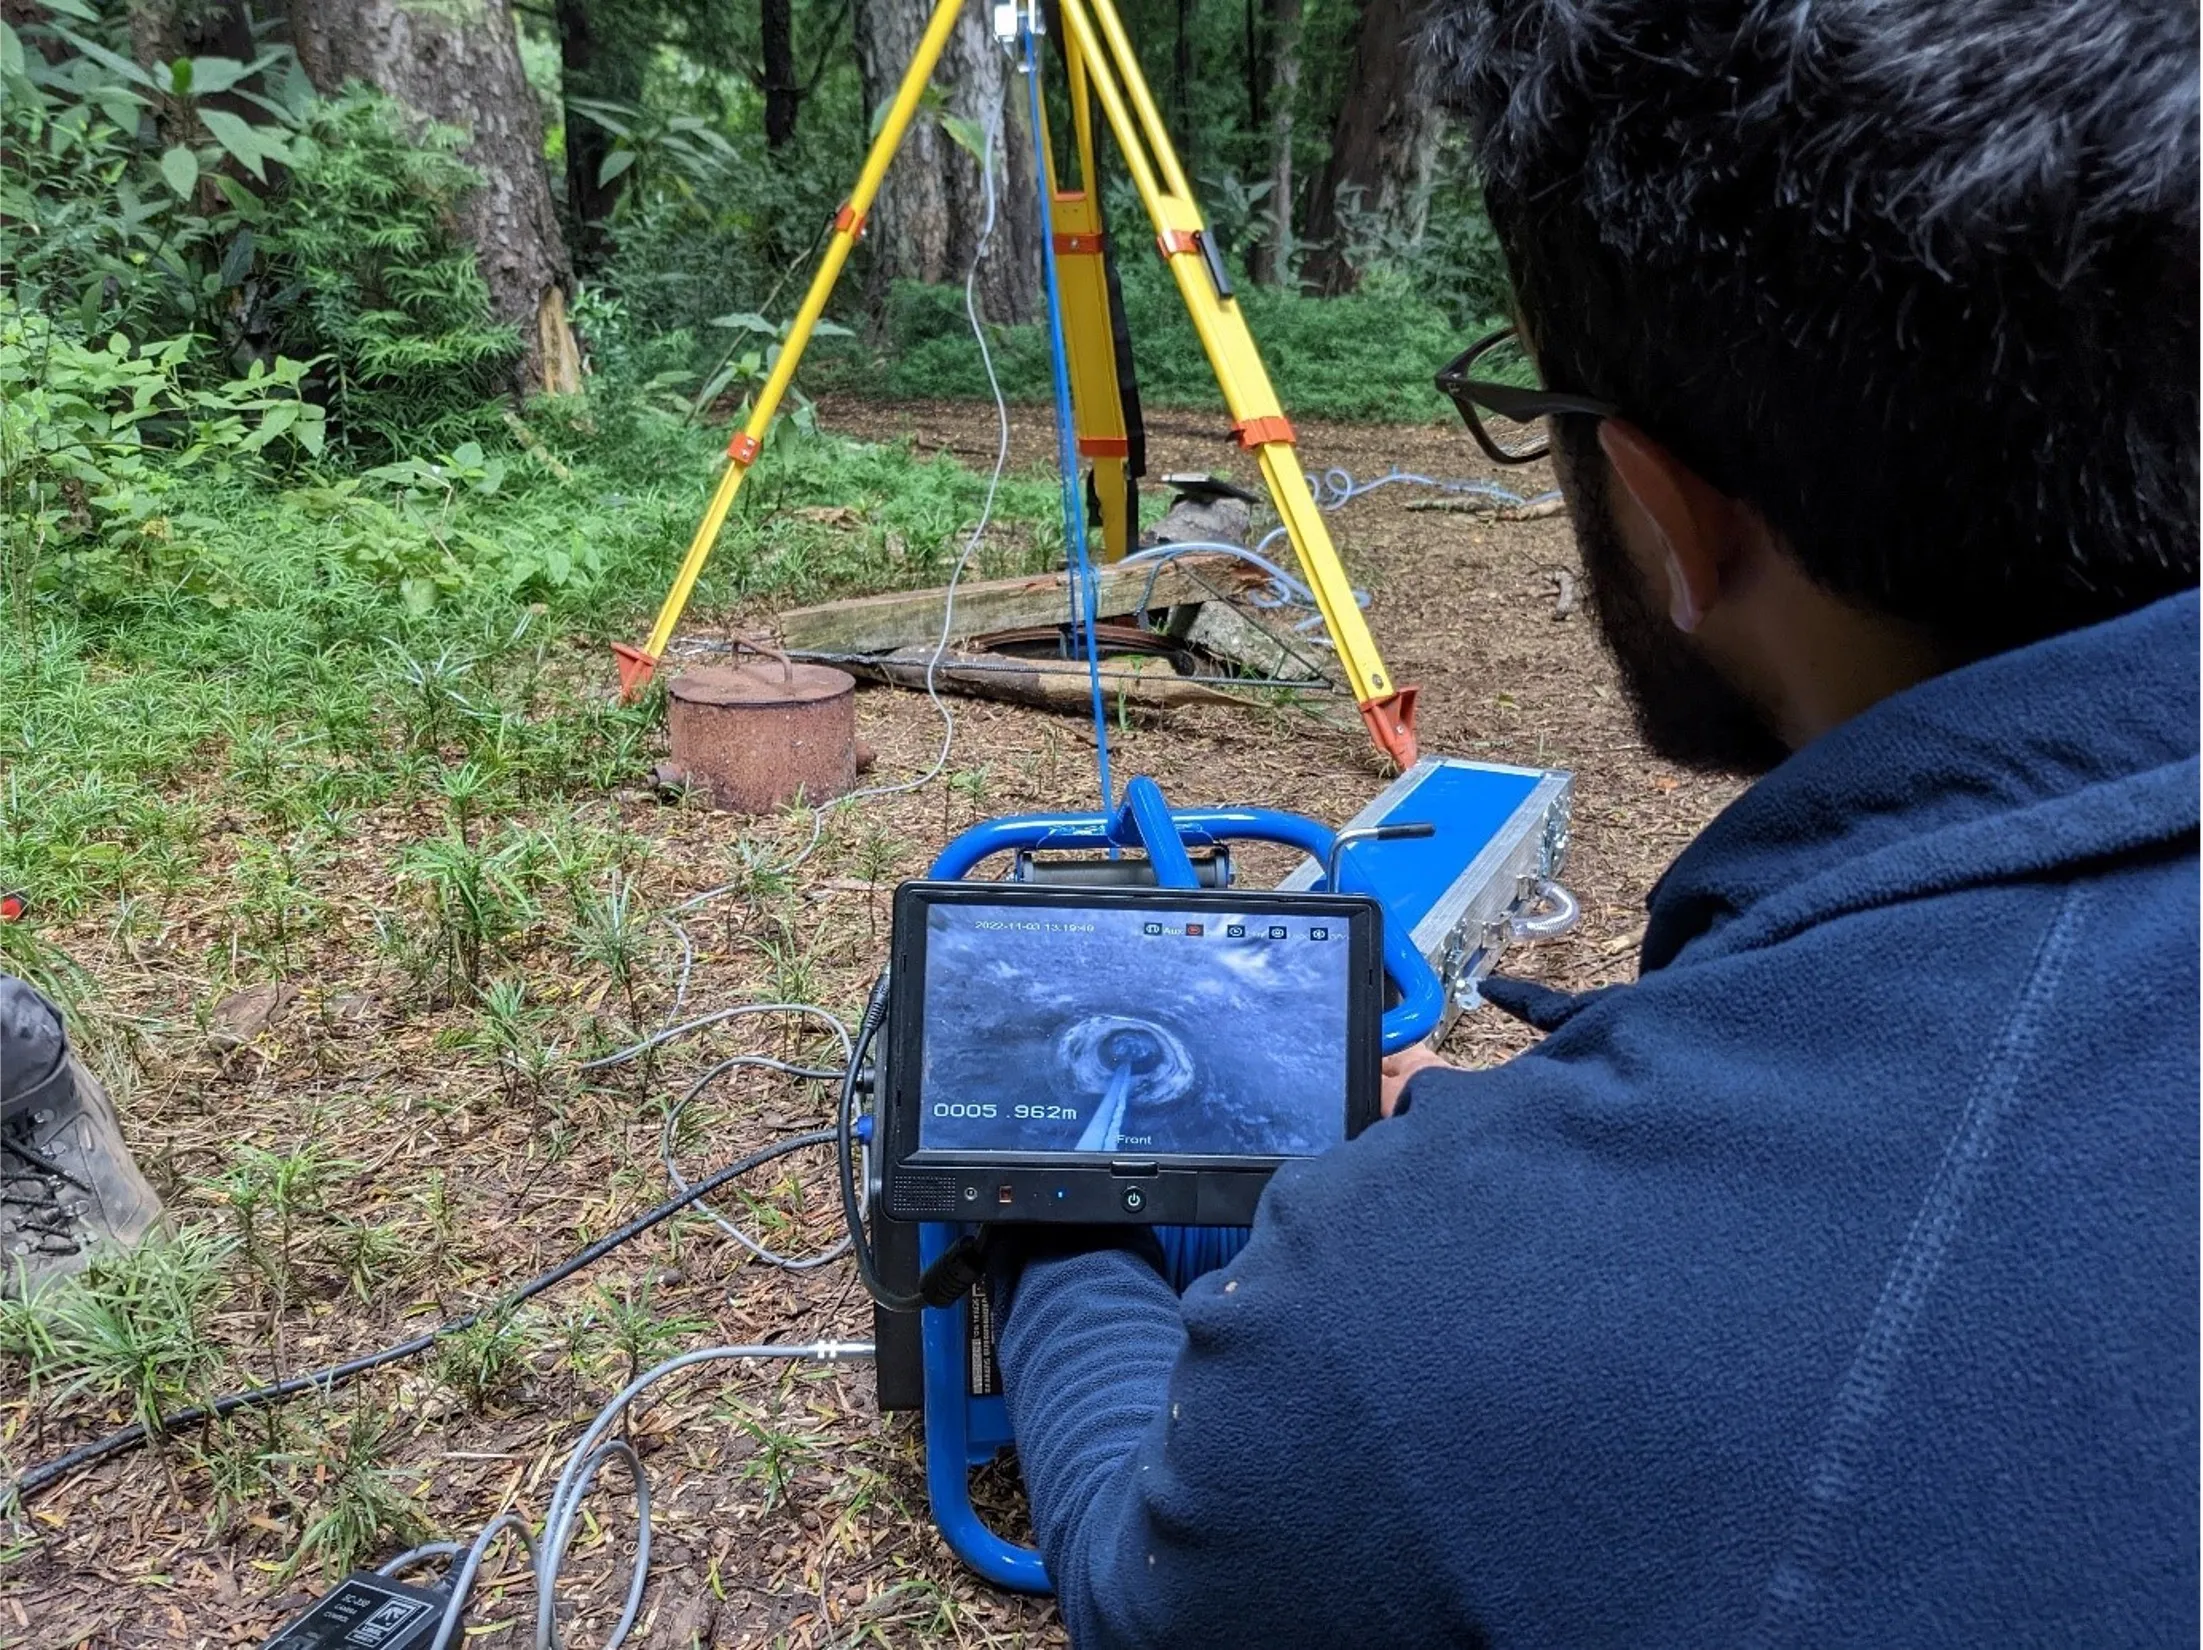 Pictured in a wooded area, a person assesses a camera with yellow bracketing equipment in the background.